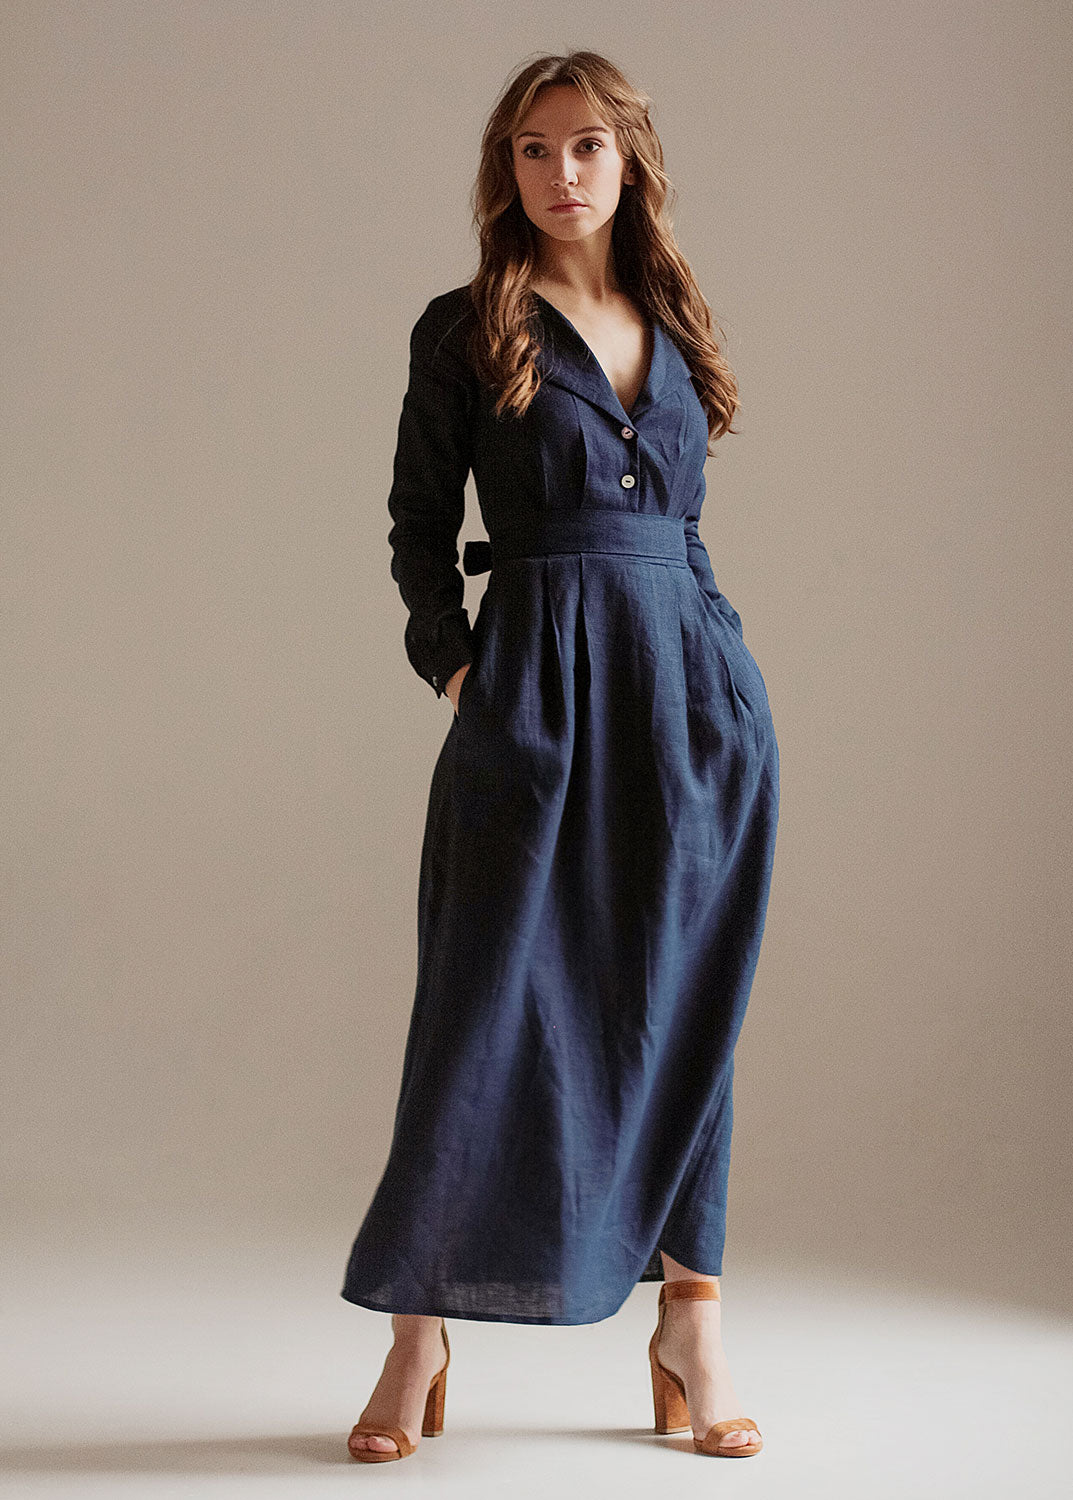 "Tristan" Linen Navy Blue Maxi Dress with sleeves